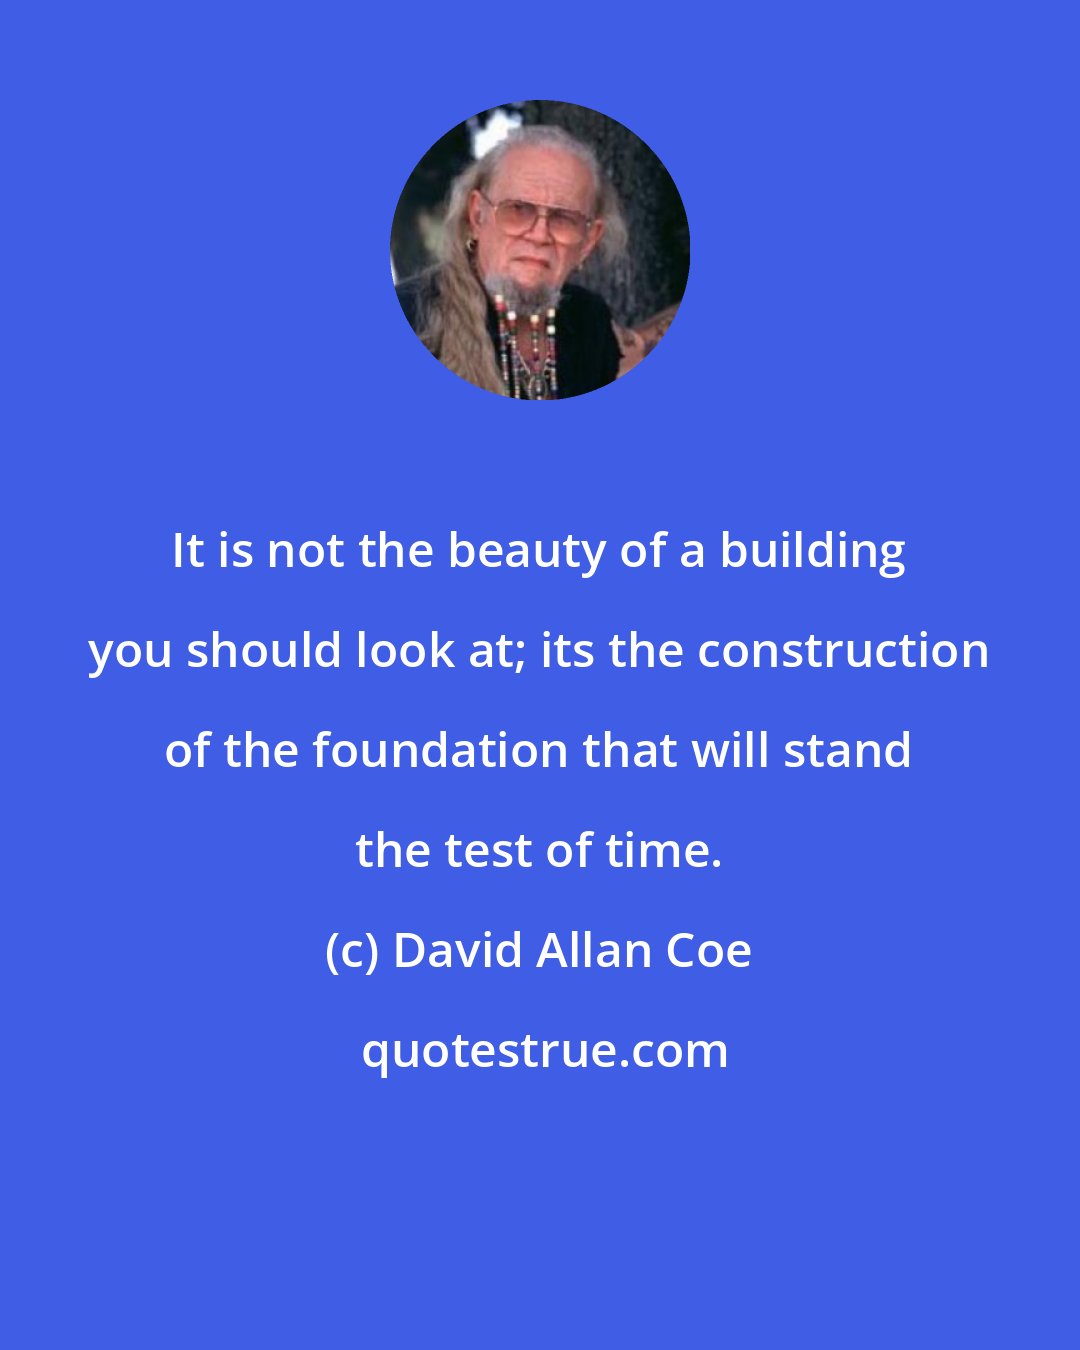 David Allan Coe: It is not the beauty of a building you should look at; its the construction of the foundation that will stand the test of time.